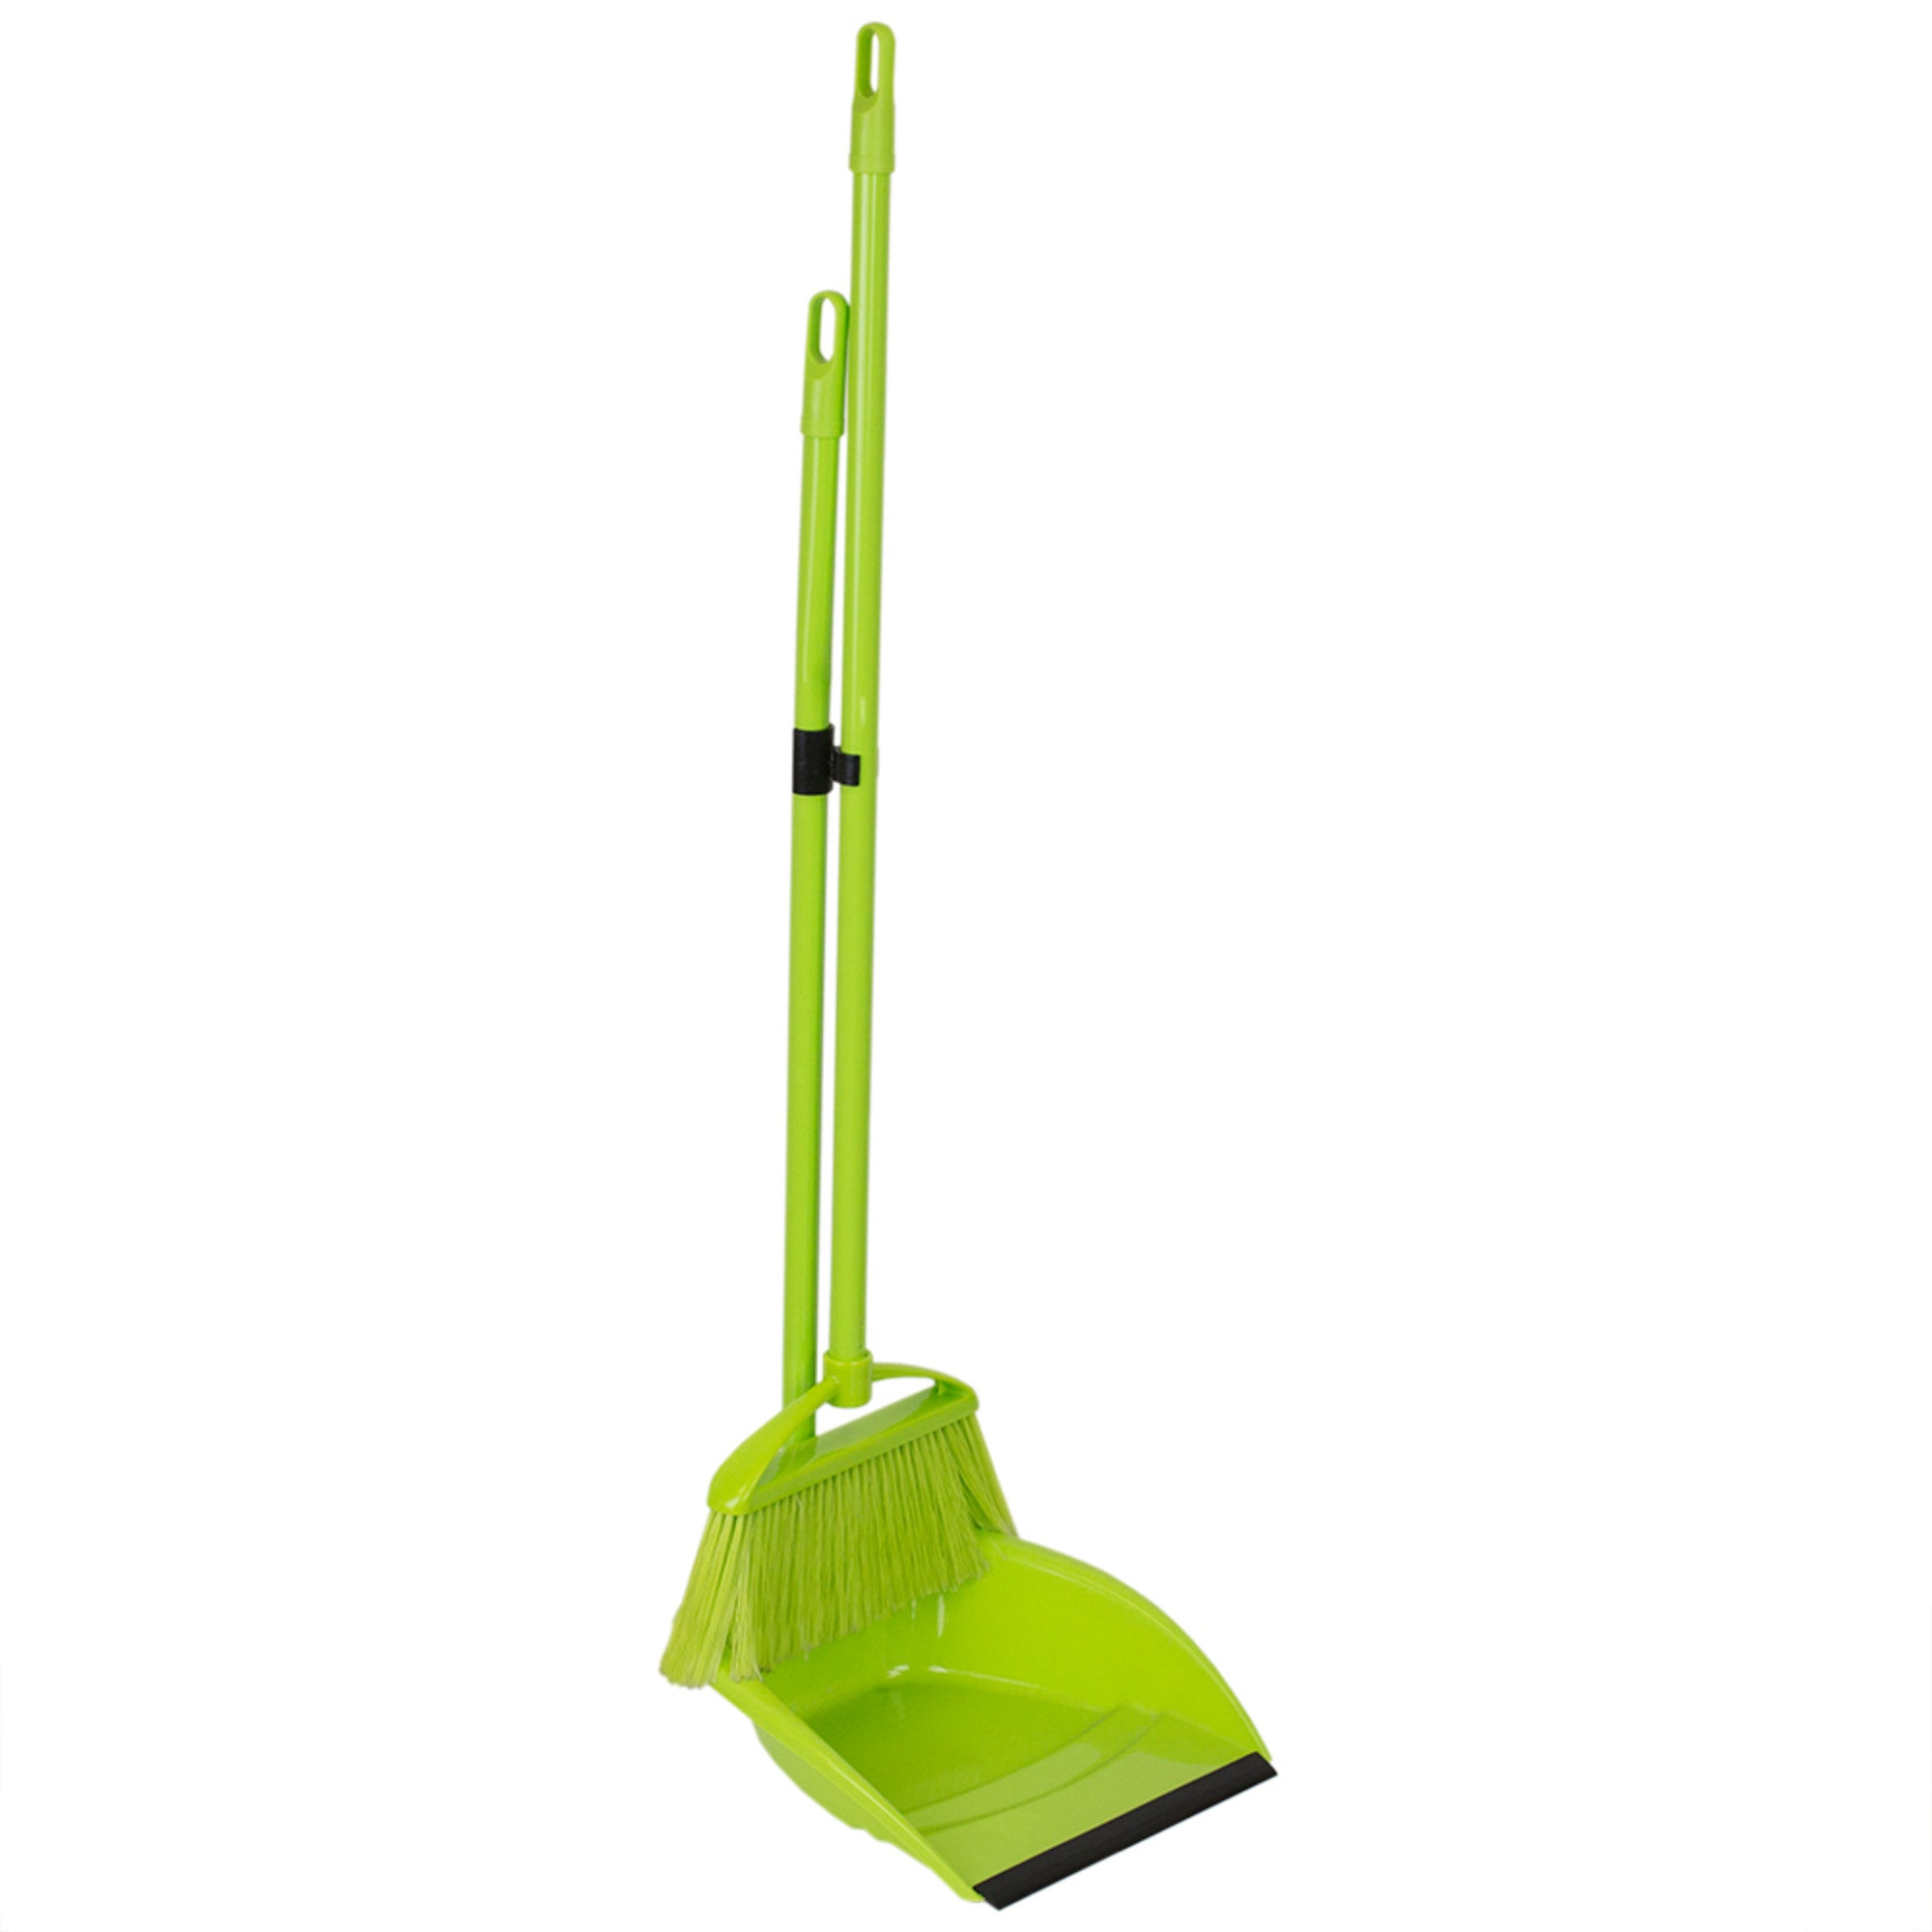 Home Basics Brights Collection 2 Piece Sweeper Set - Assorted Colors